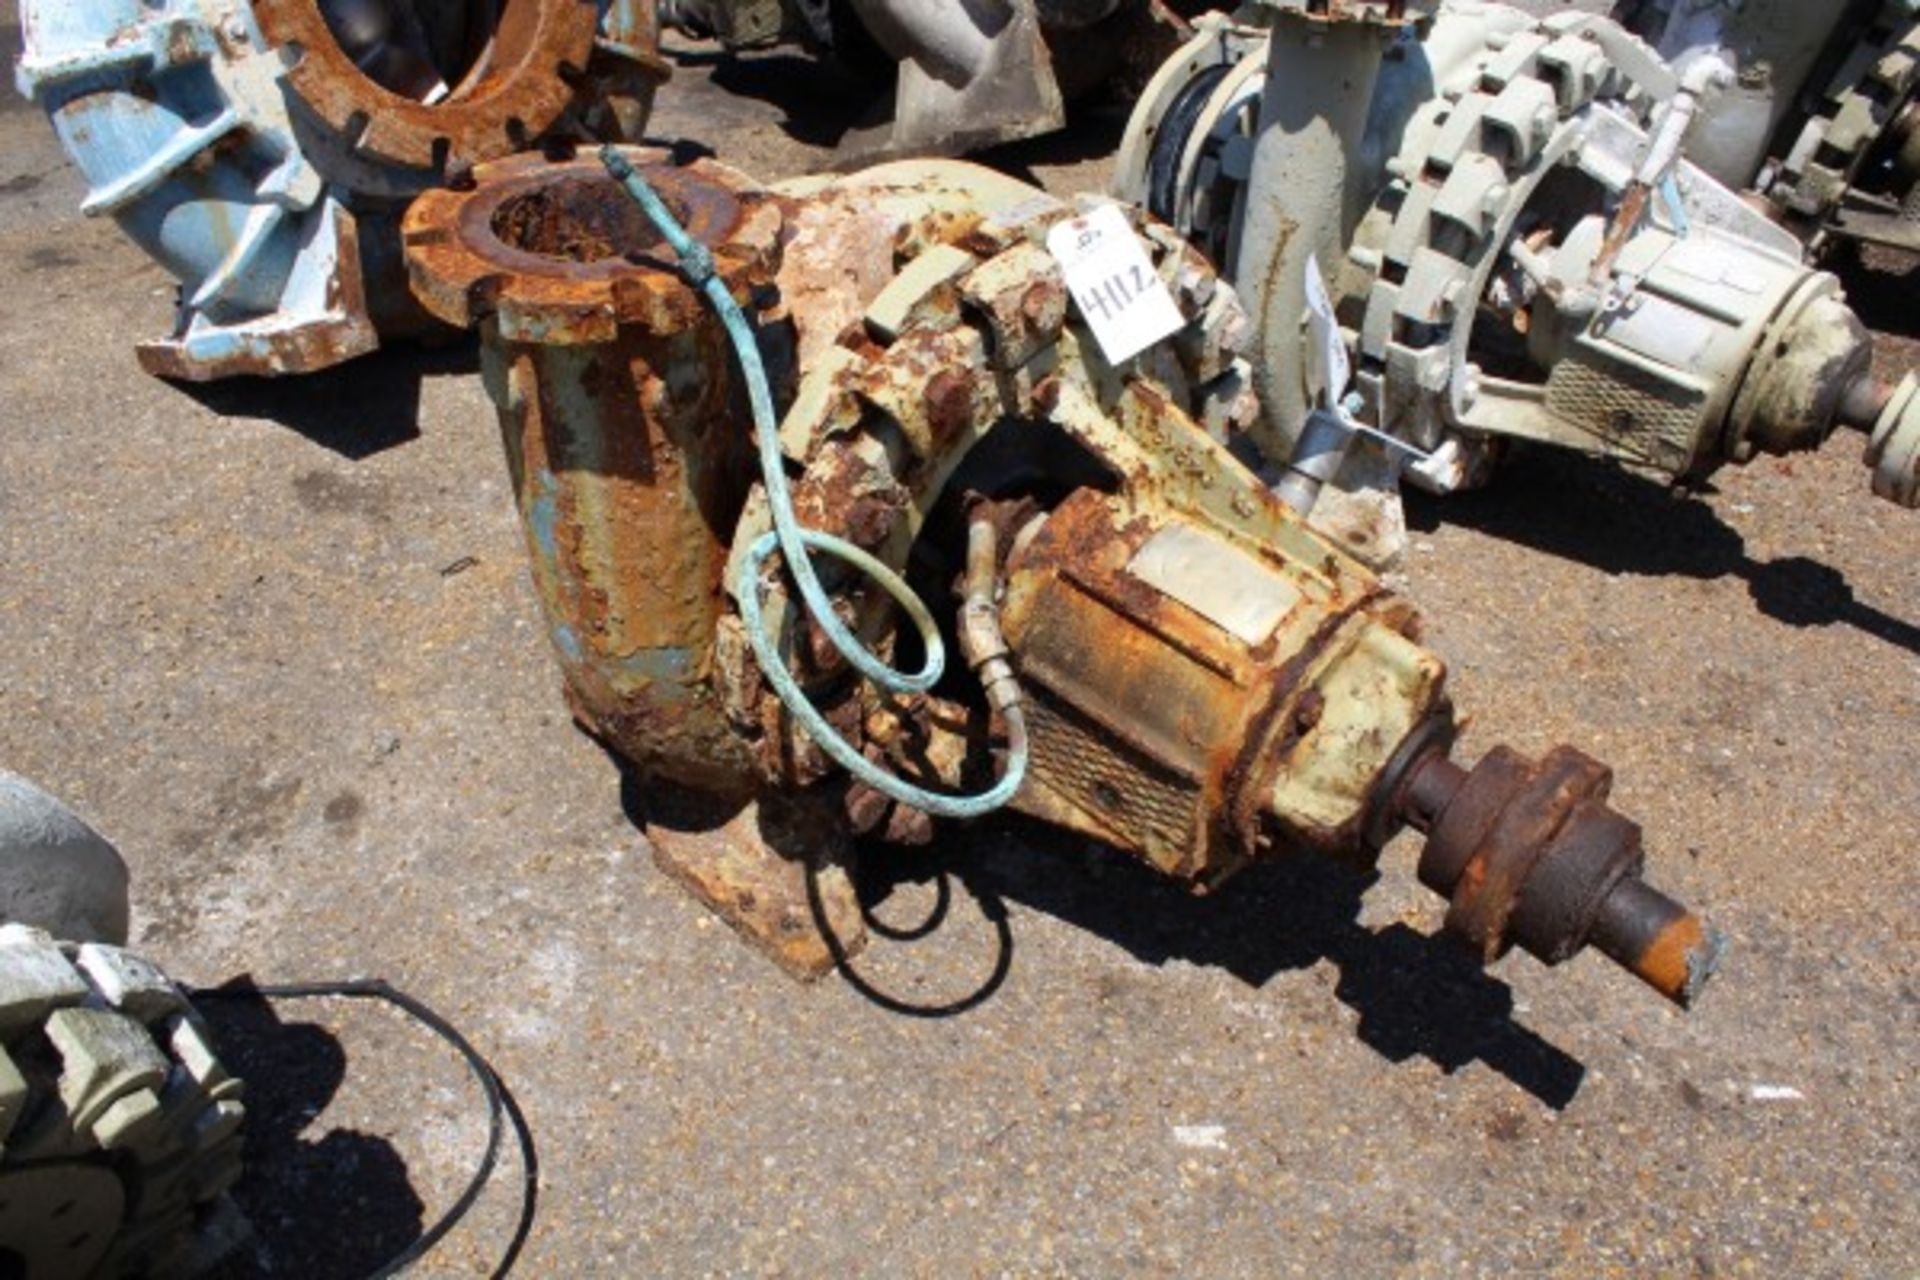 Allis Chalmers 6 x 8 x 17 PWO Pump | Seller to load for $10 per lot or buyers may remove hand